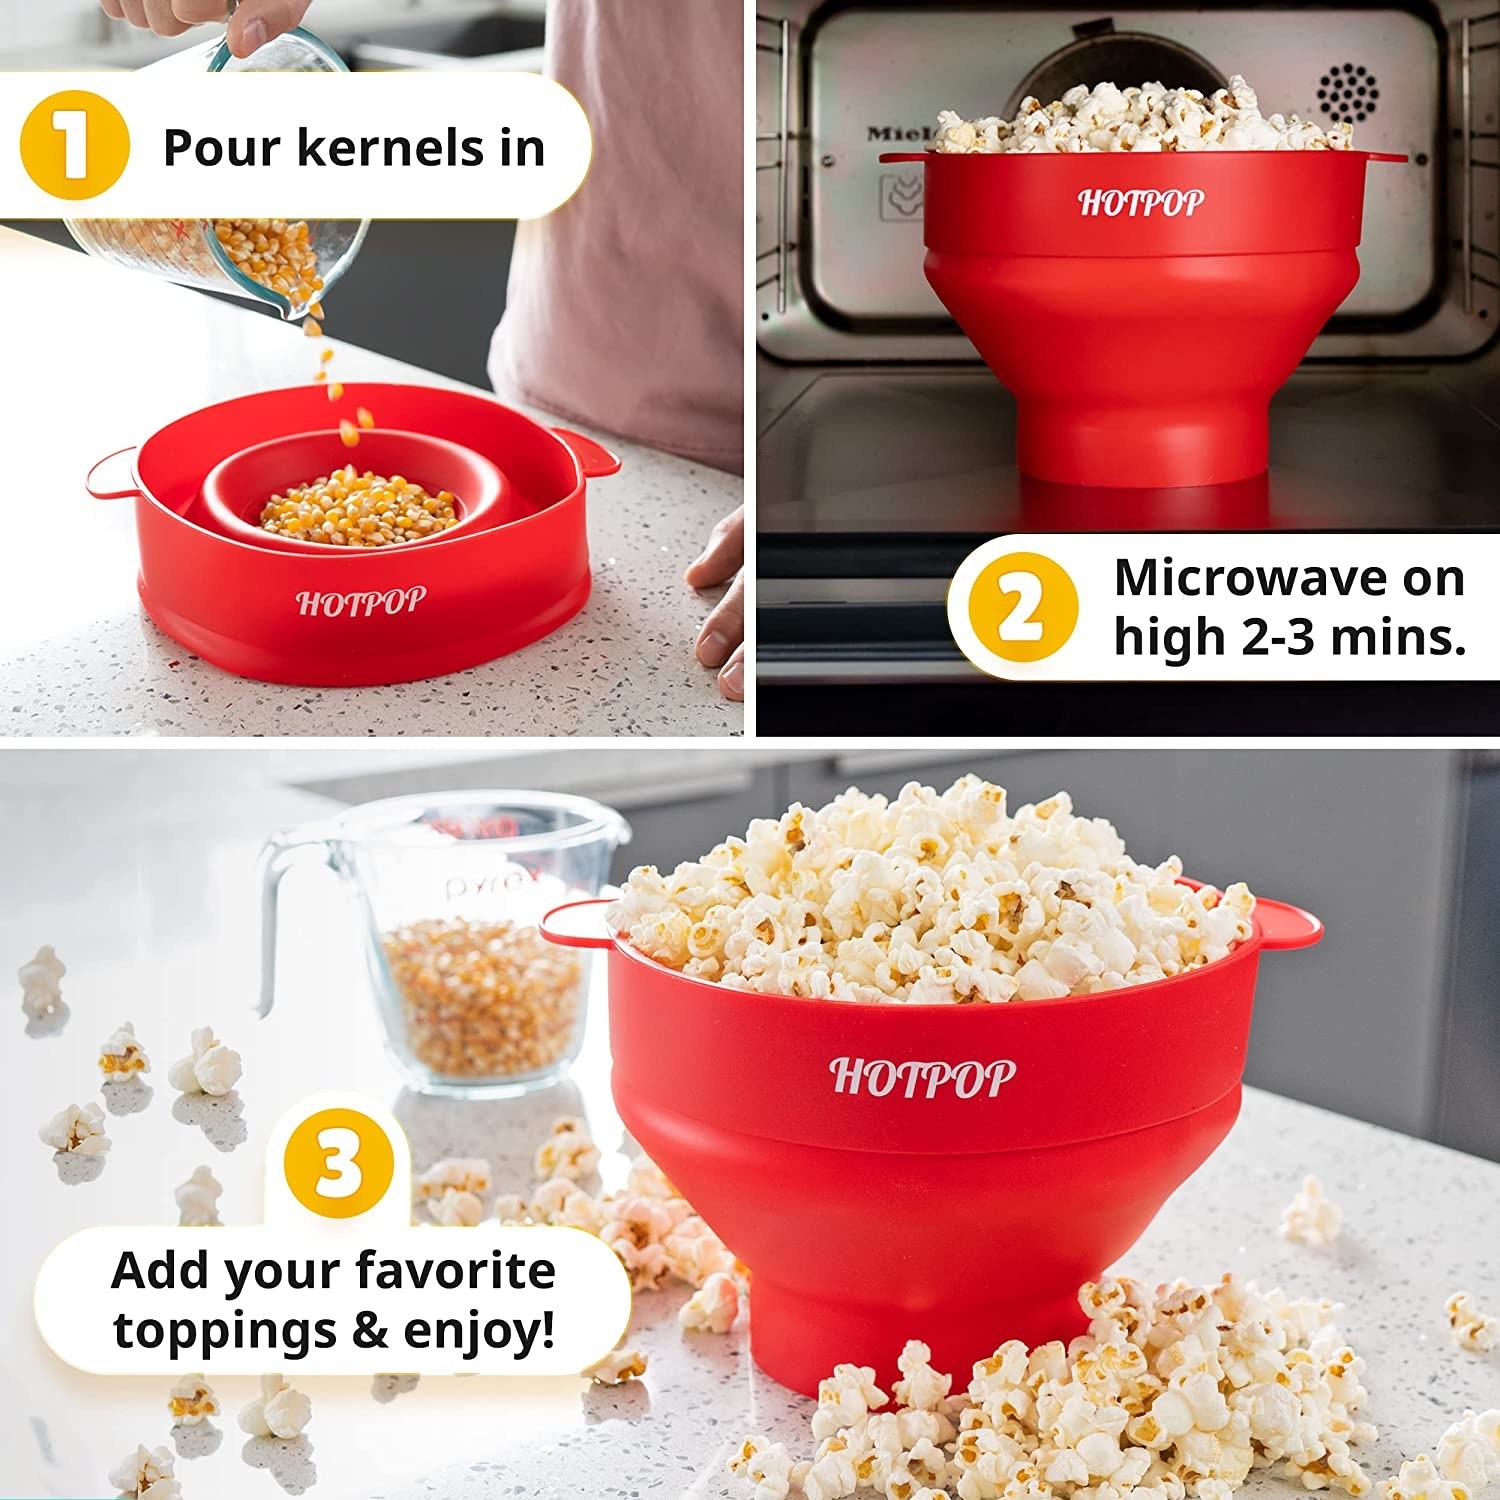 a demonstration of the popcorn popper being used to pop popcorn